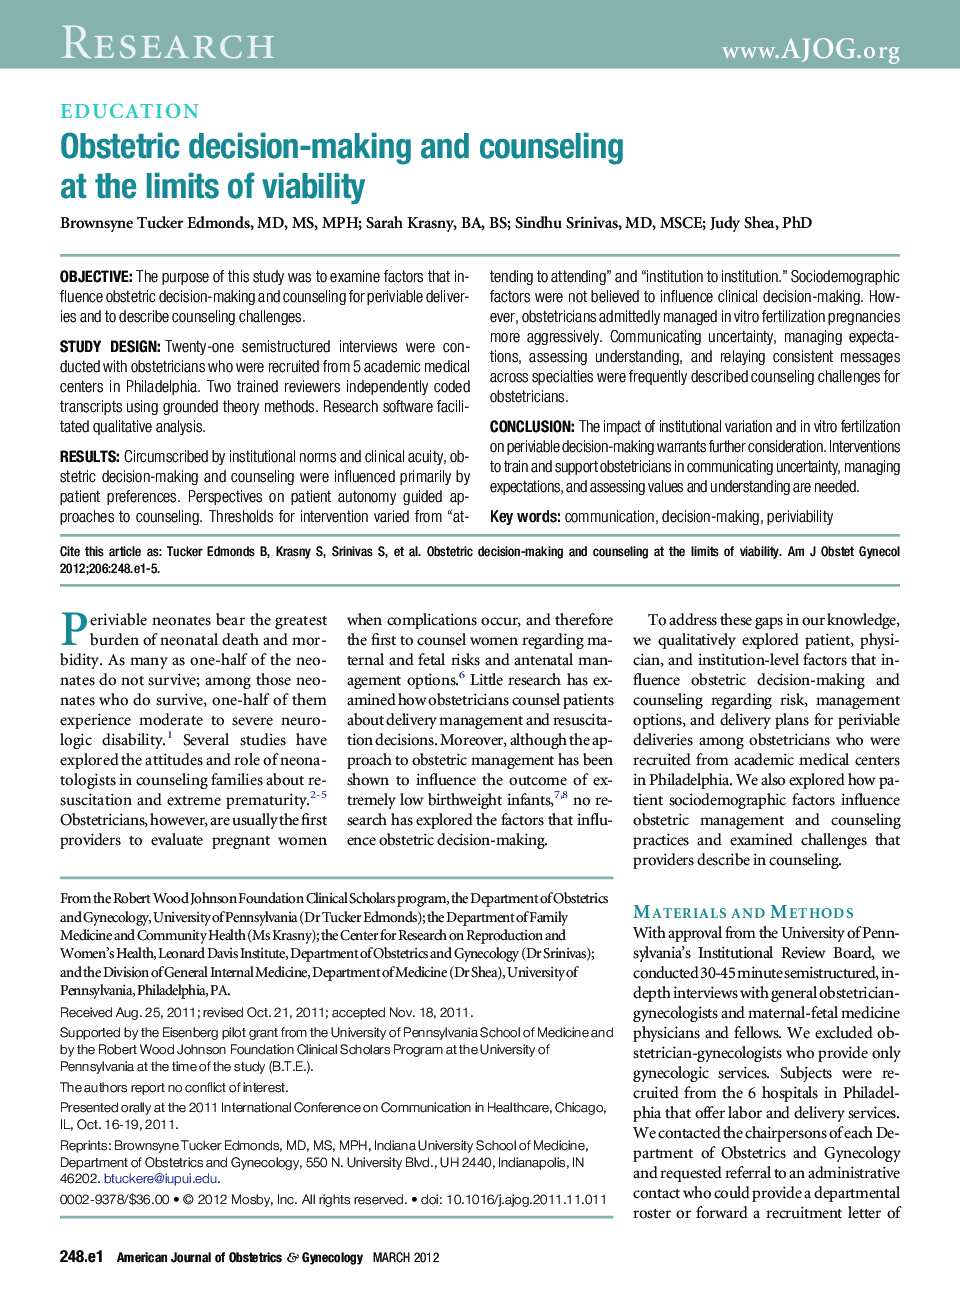 Obstetric decision-making and counseling at the limits of viability